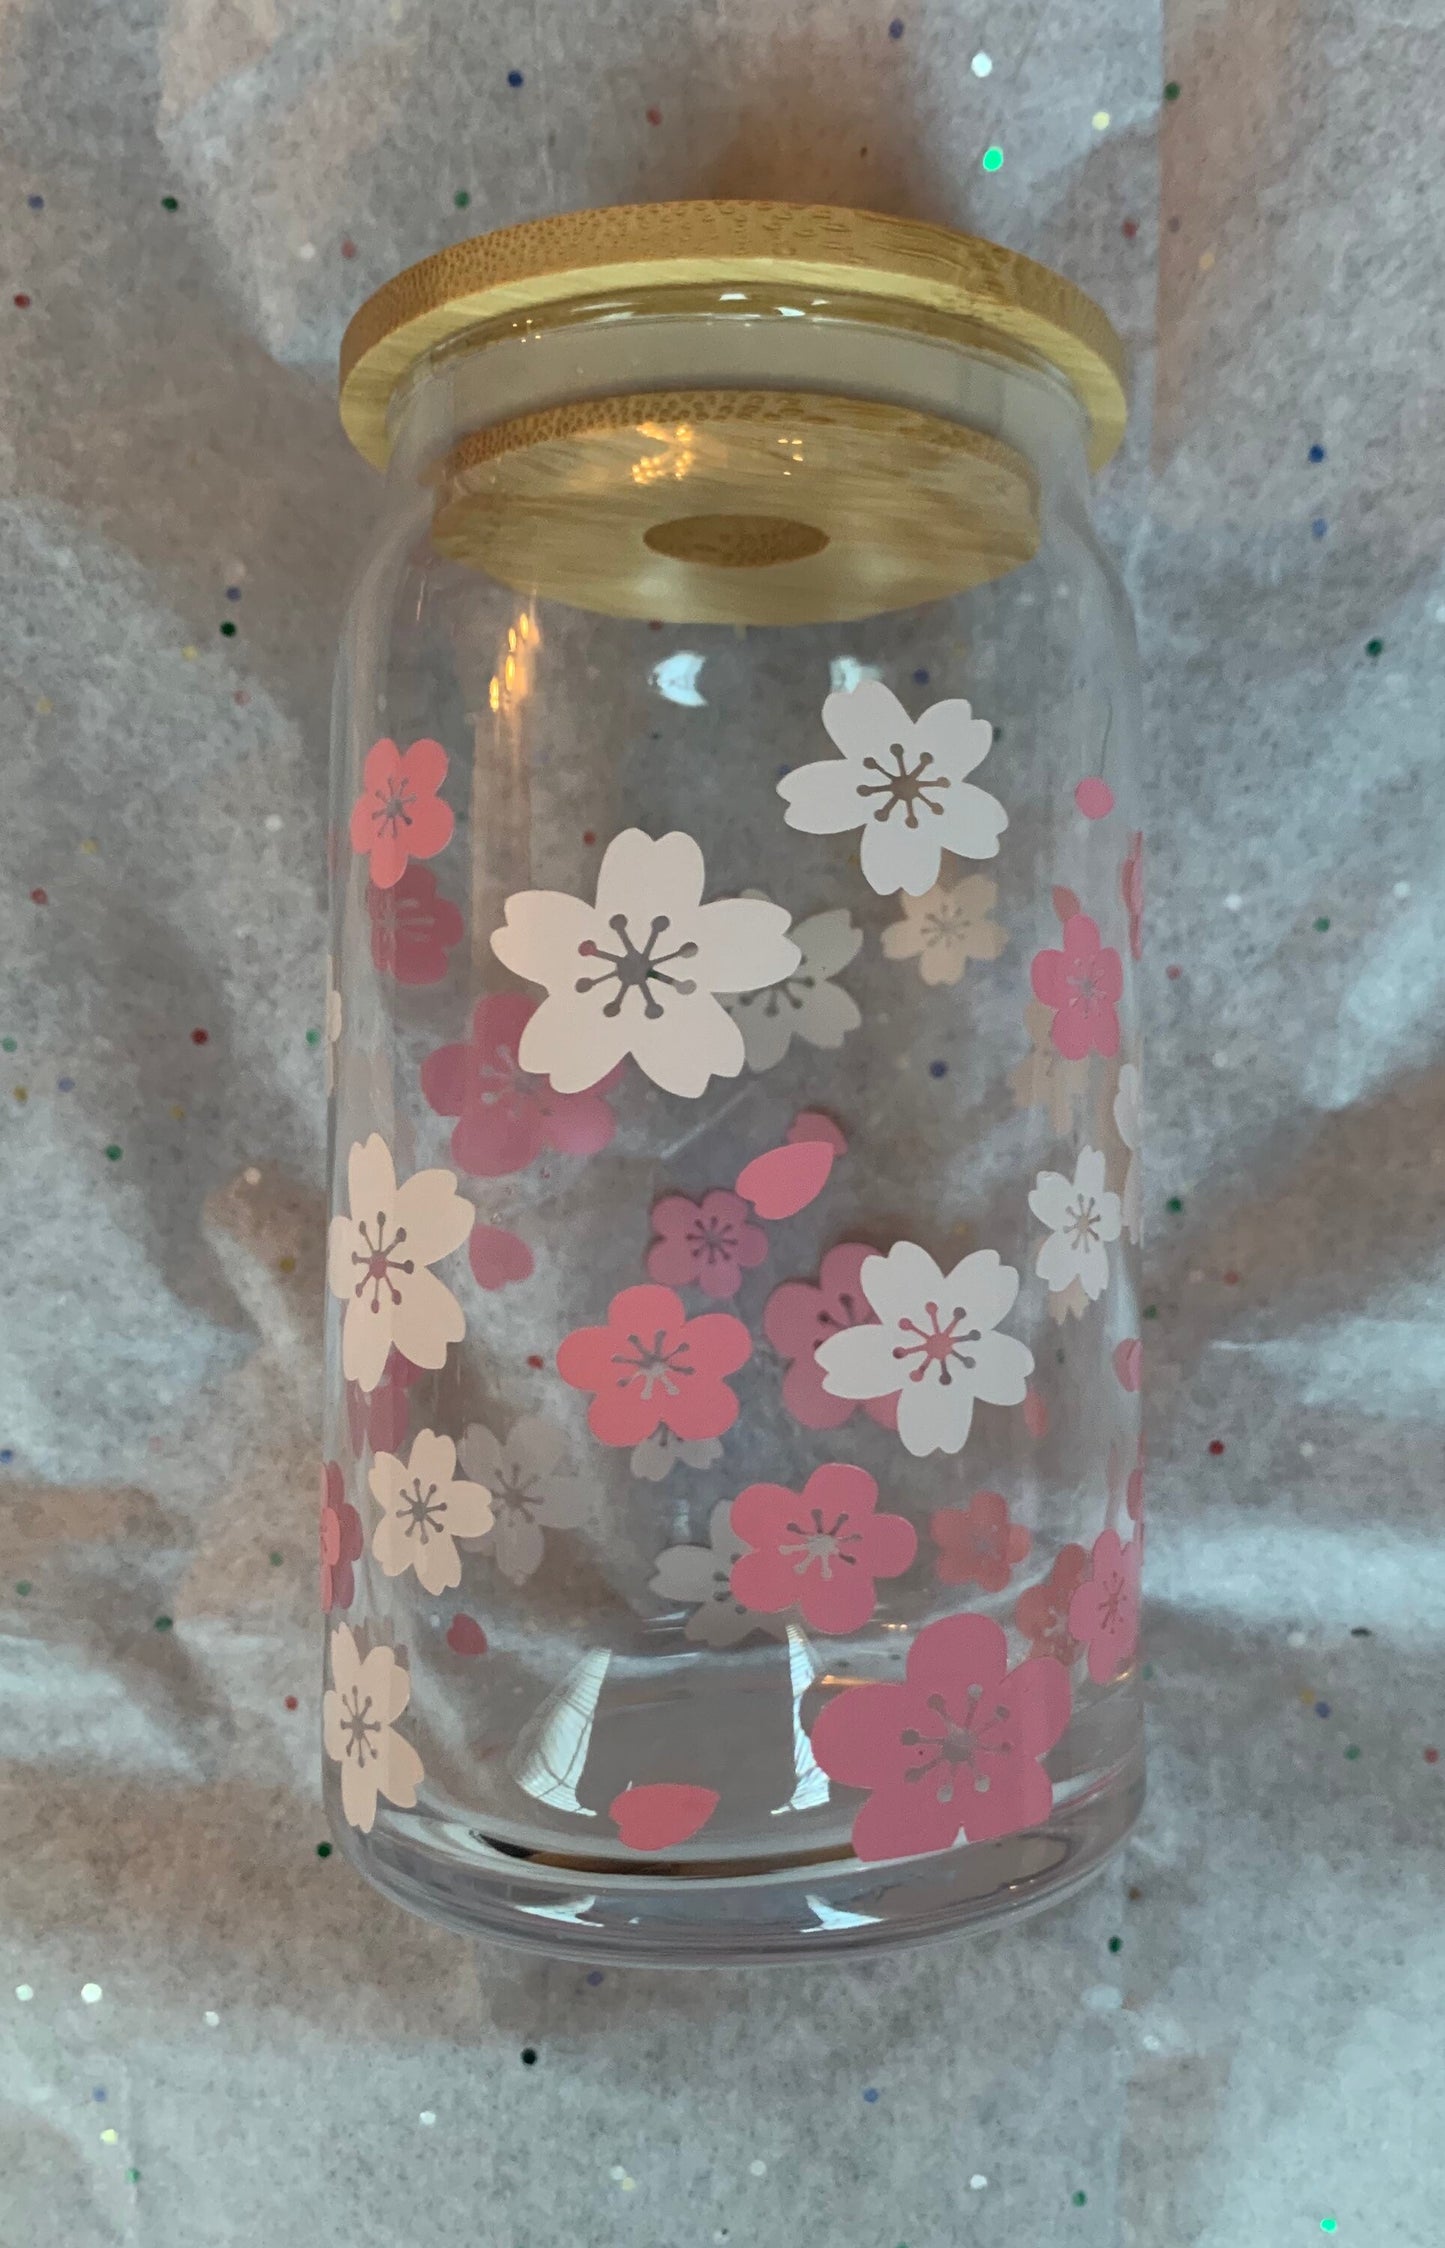 COLOR CHANGING Cherry Blossom 16 oz Libbey Glass Cup